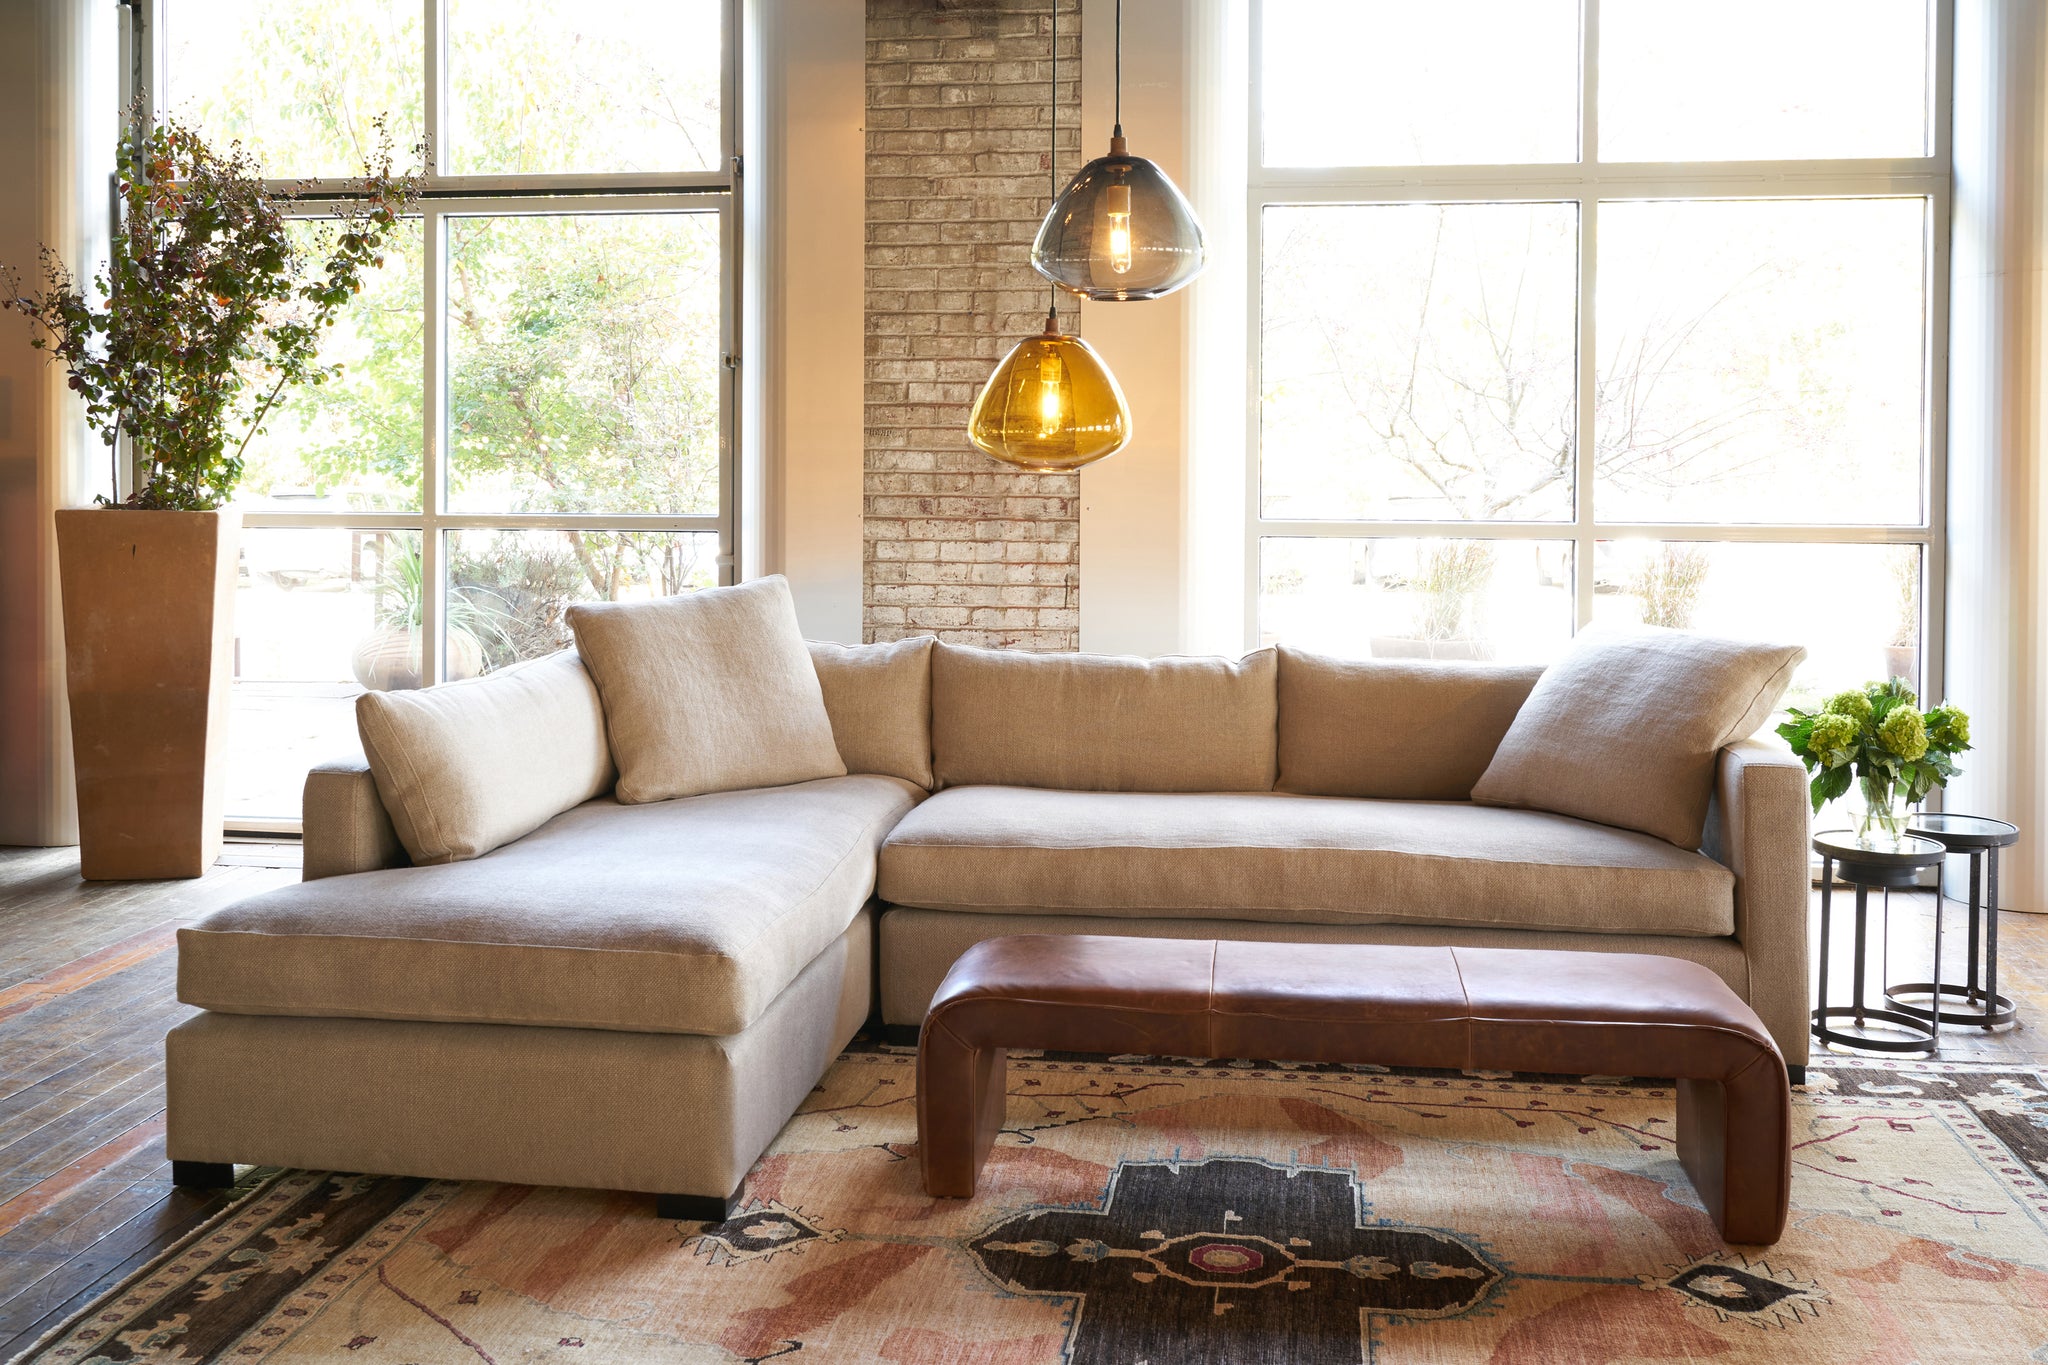  Leather Bench in front of a sectional sofa. Two glass pendants hang above. A large clay pot with branches is on the left side. Photographed in Spur Terracotta. 